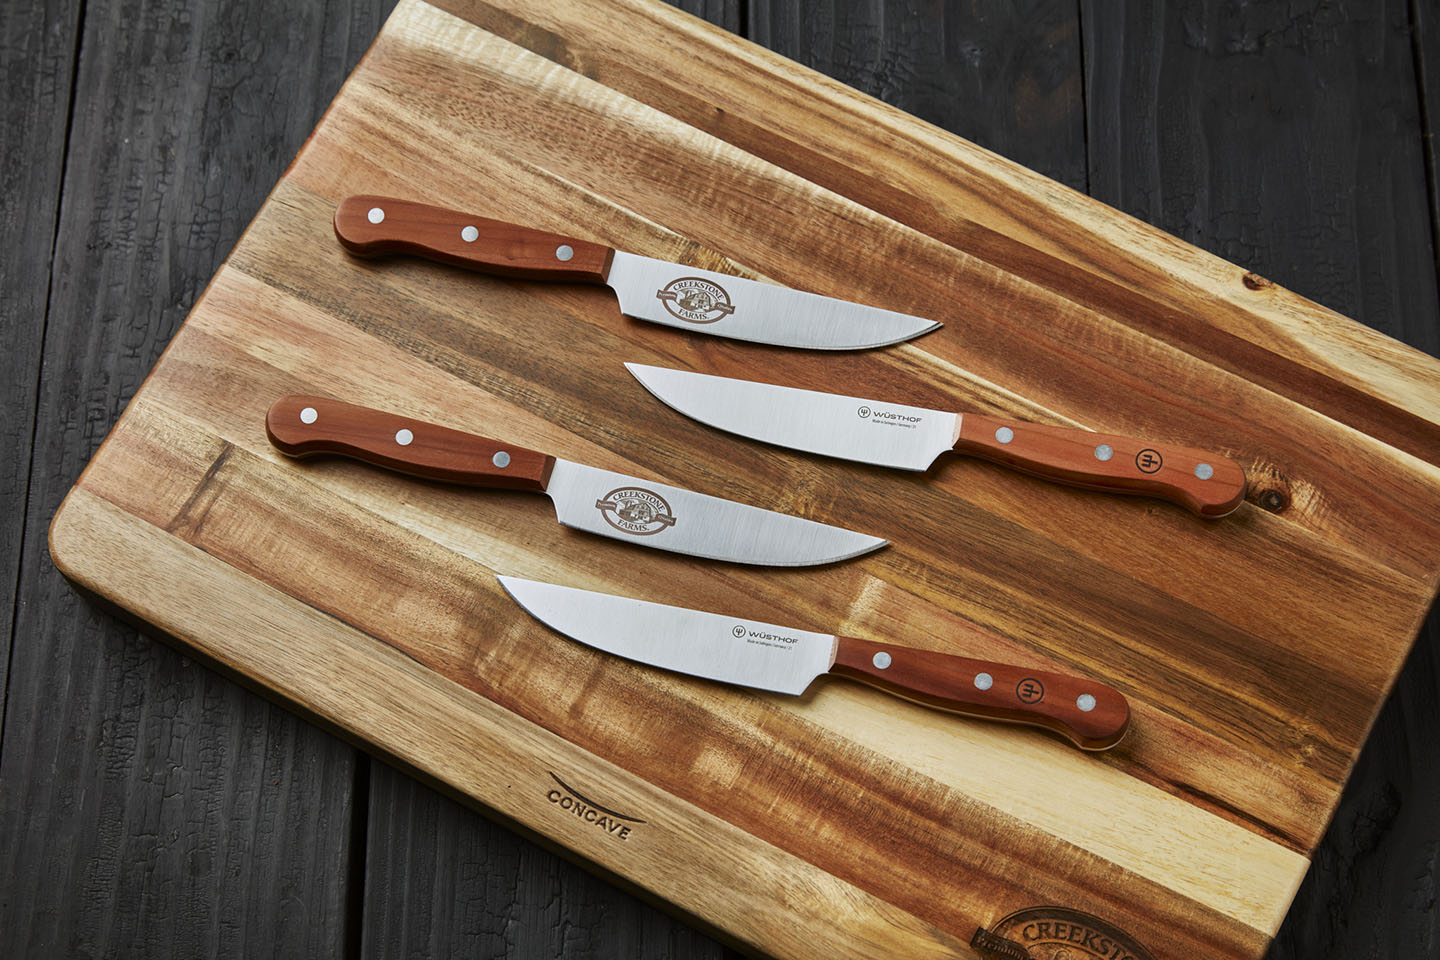 WÜSTHOF - The Three Piece Charcuterie Set offers plum wood handles and  includes a Serrated Utility Knife, Soft Cheese Knife, and Pâté Knife,  perfect for your weekend cheese board! #MyWusthof #MadeinSolingen